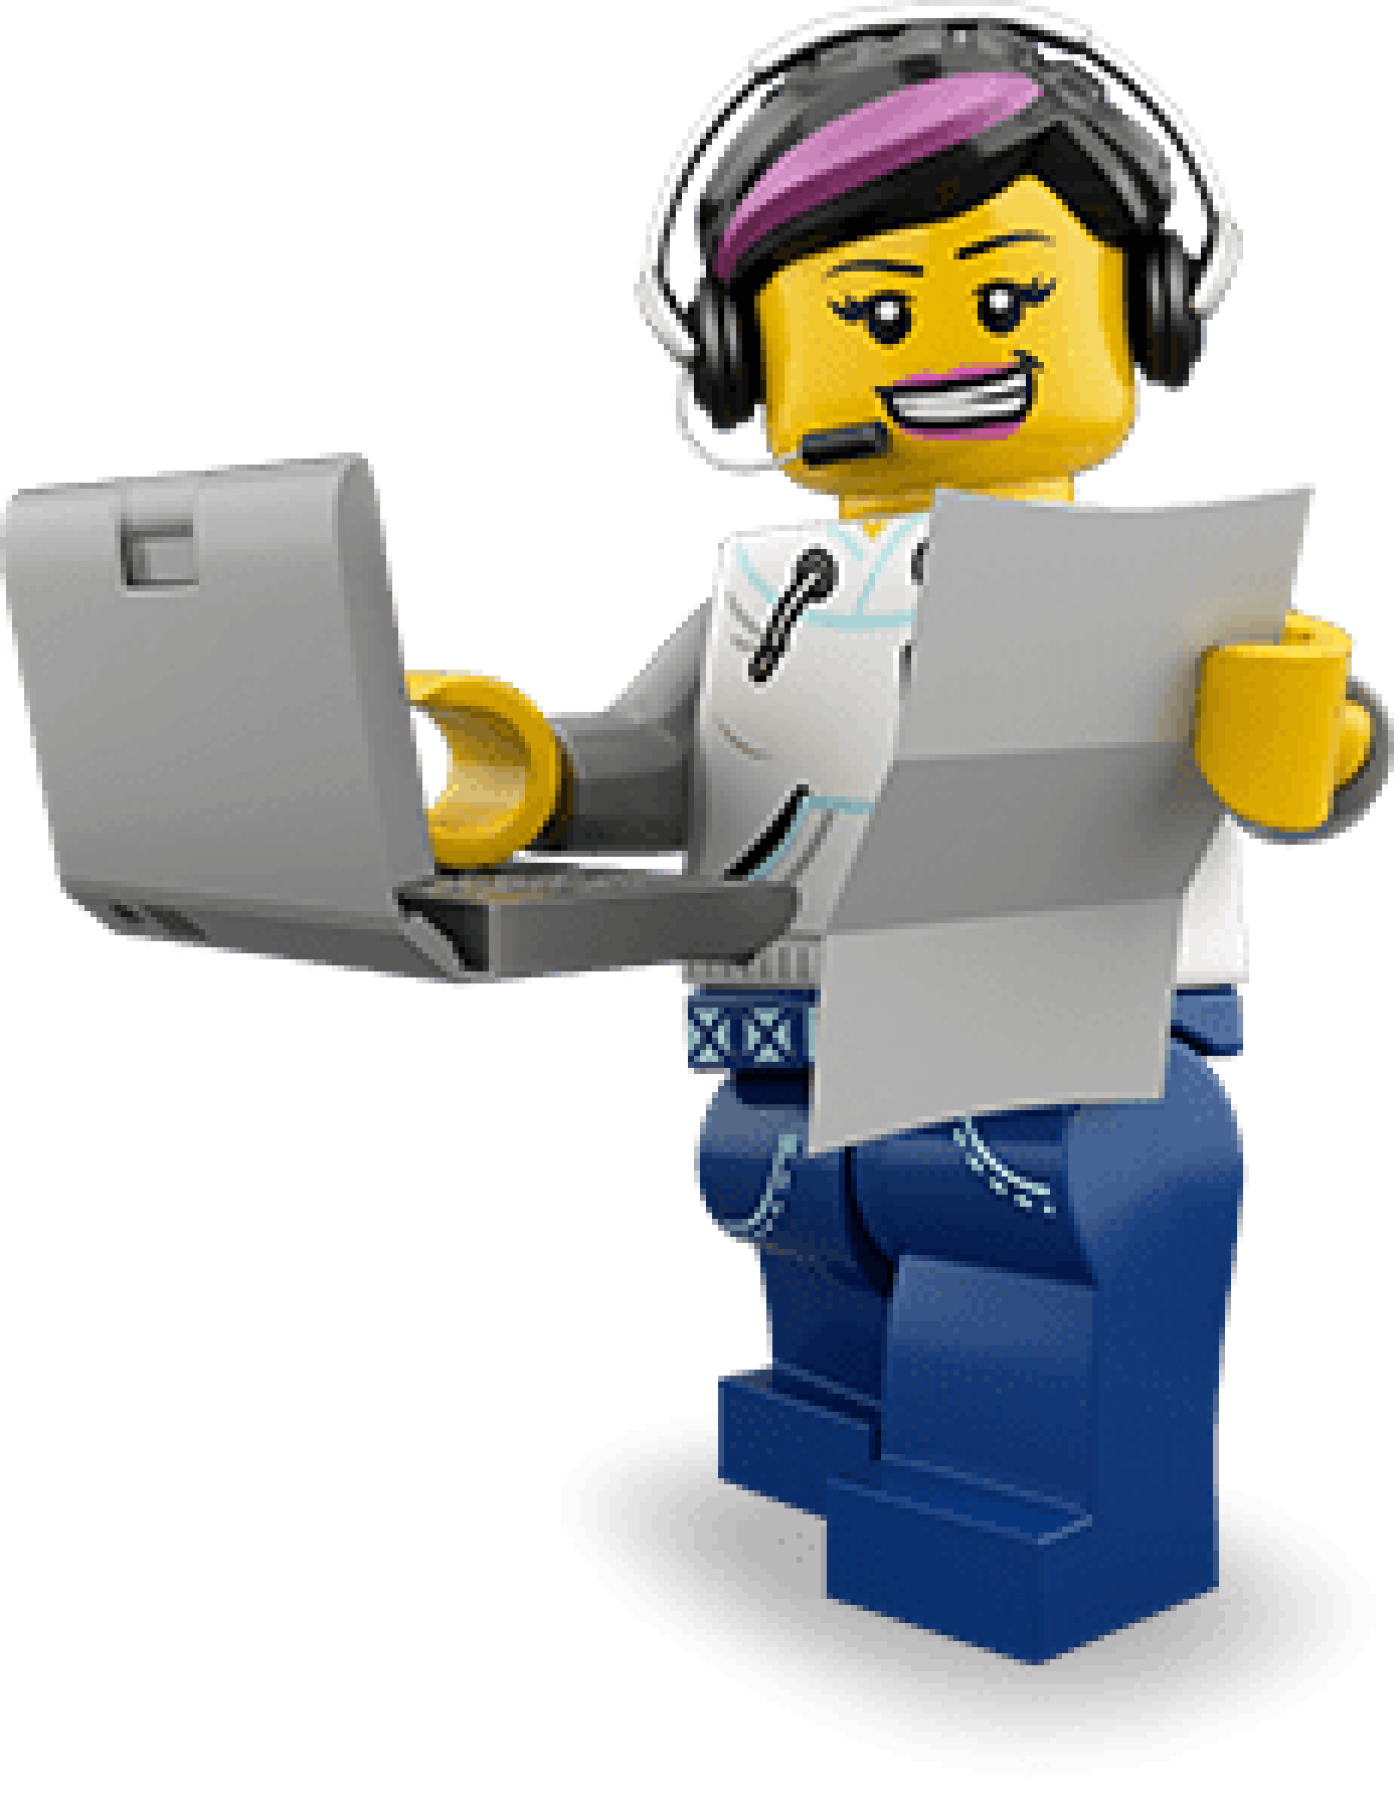 email lego customer service